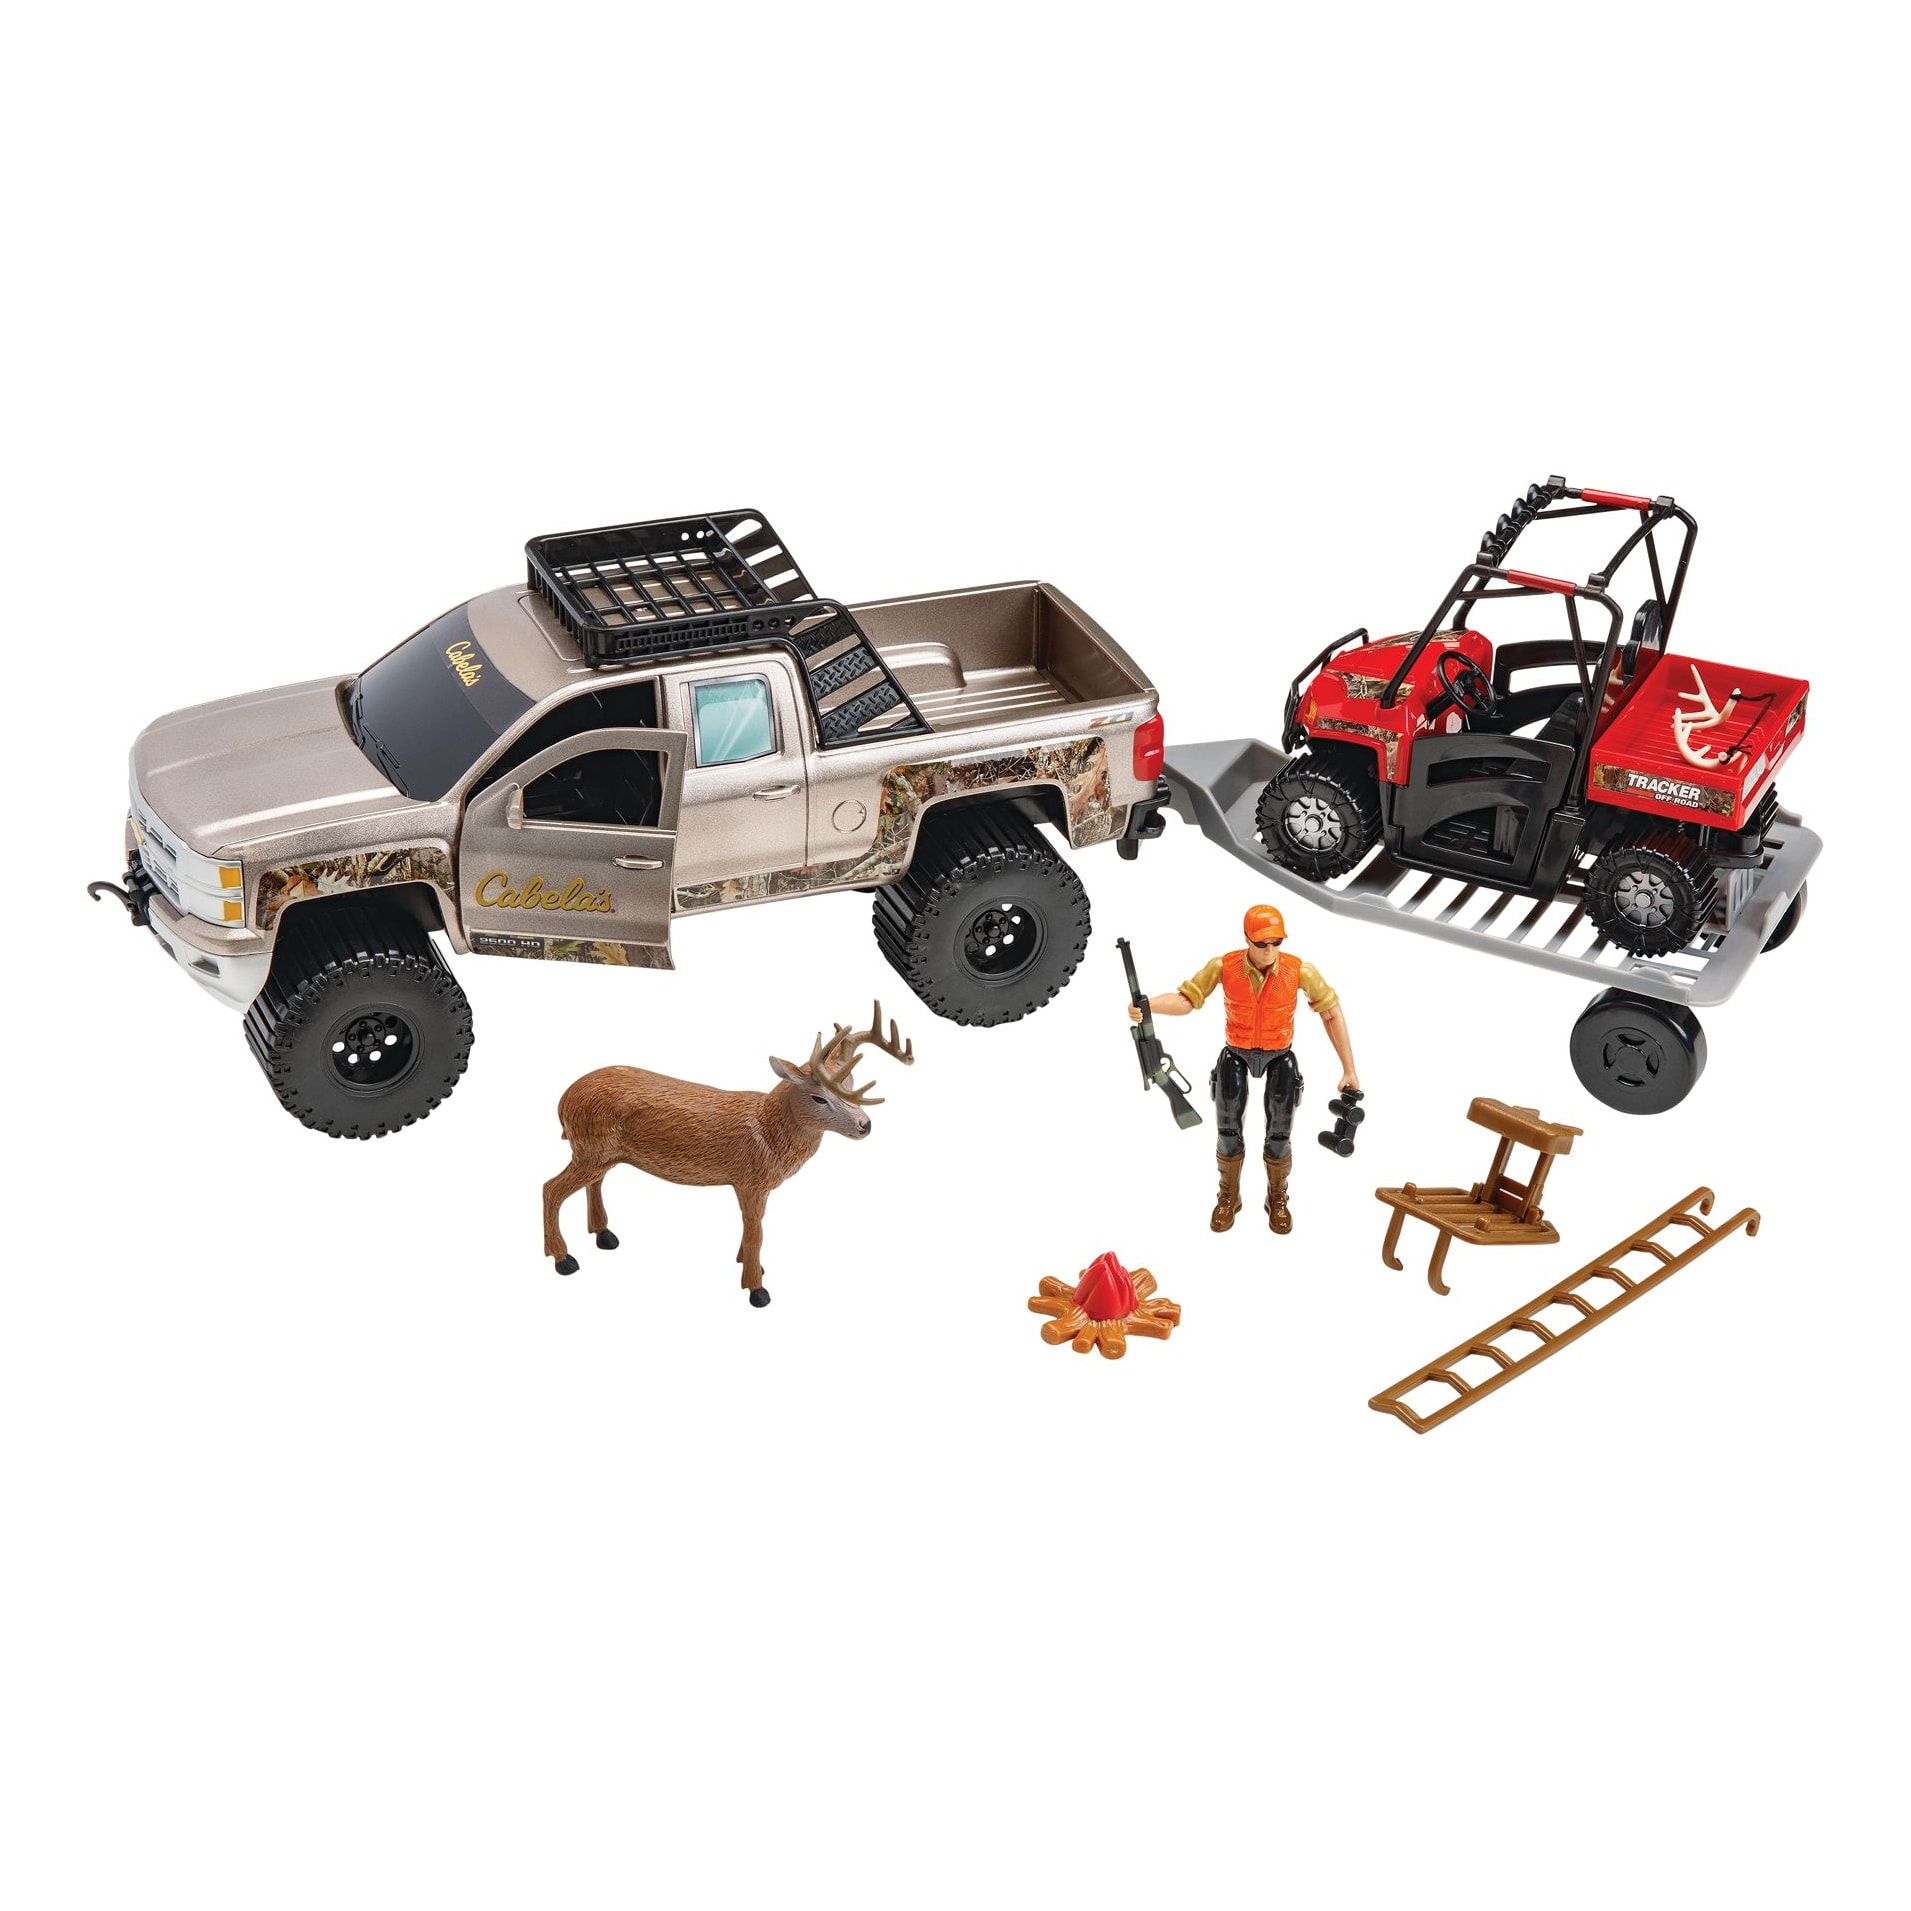 Cabela's Deluxe Licensed Chevy Hunting TrueTimber Camo Adventure Truck Play Set For Kids